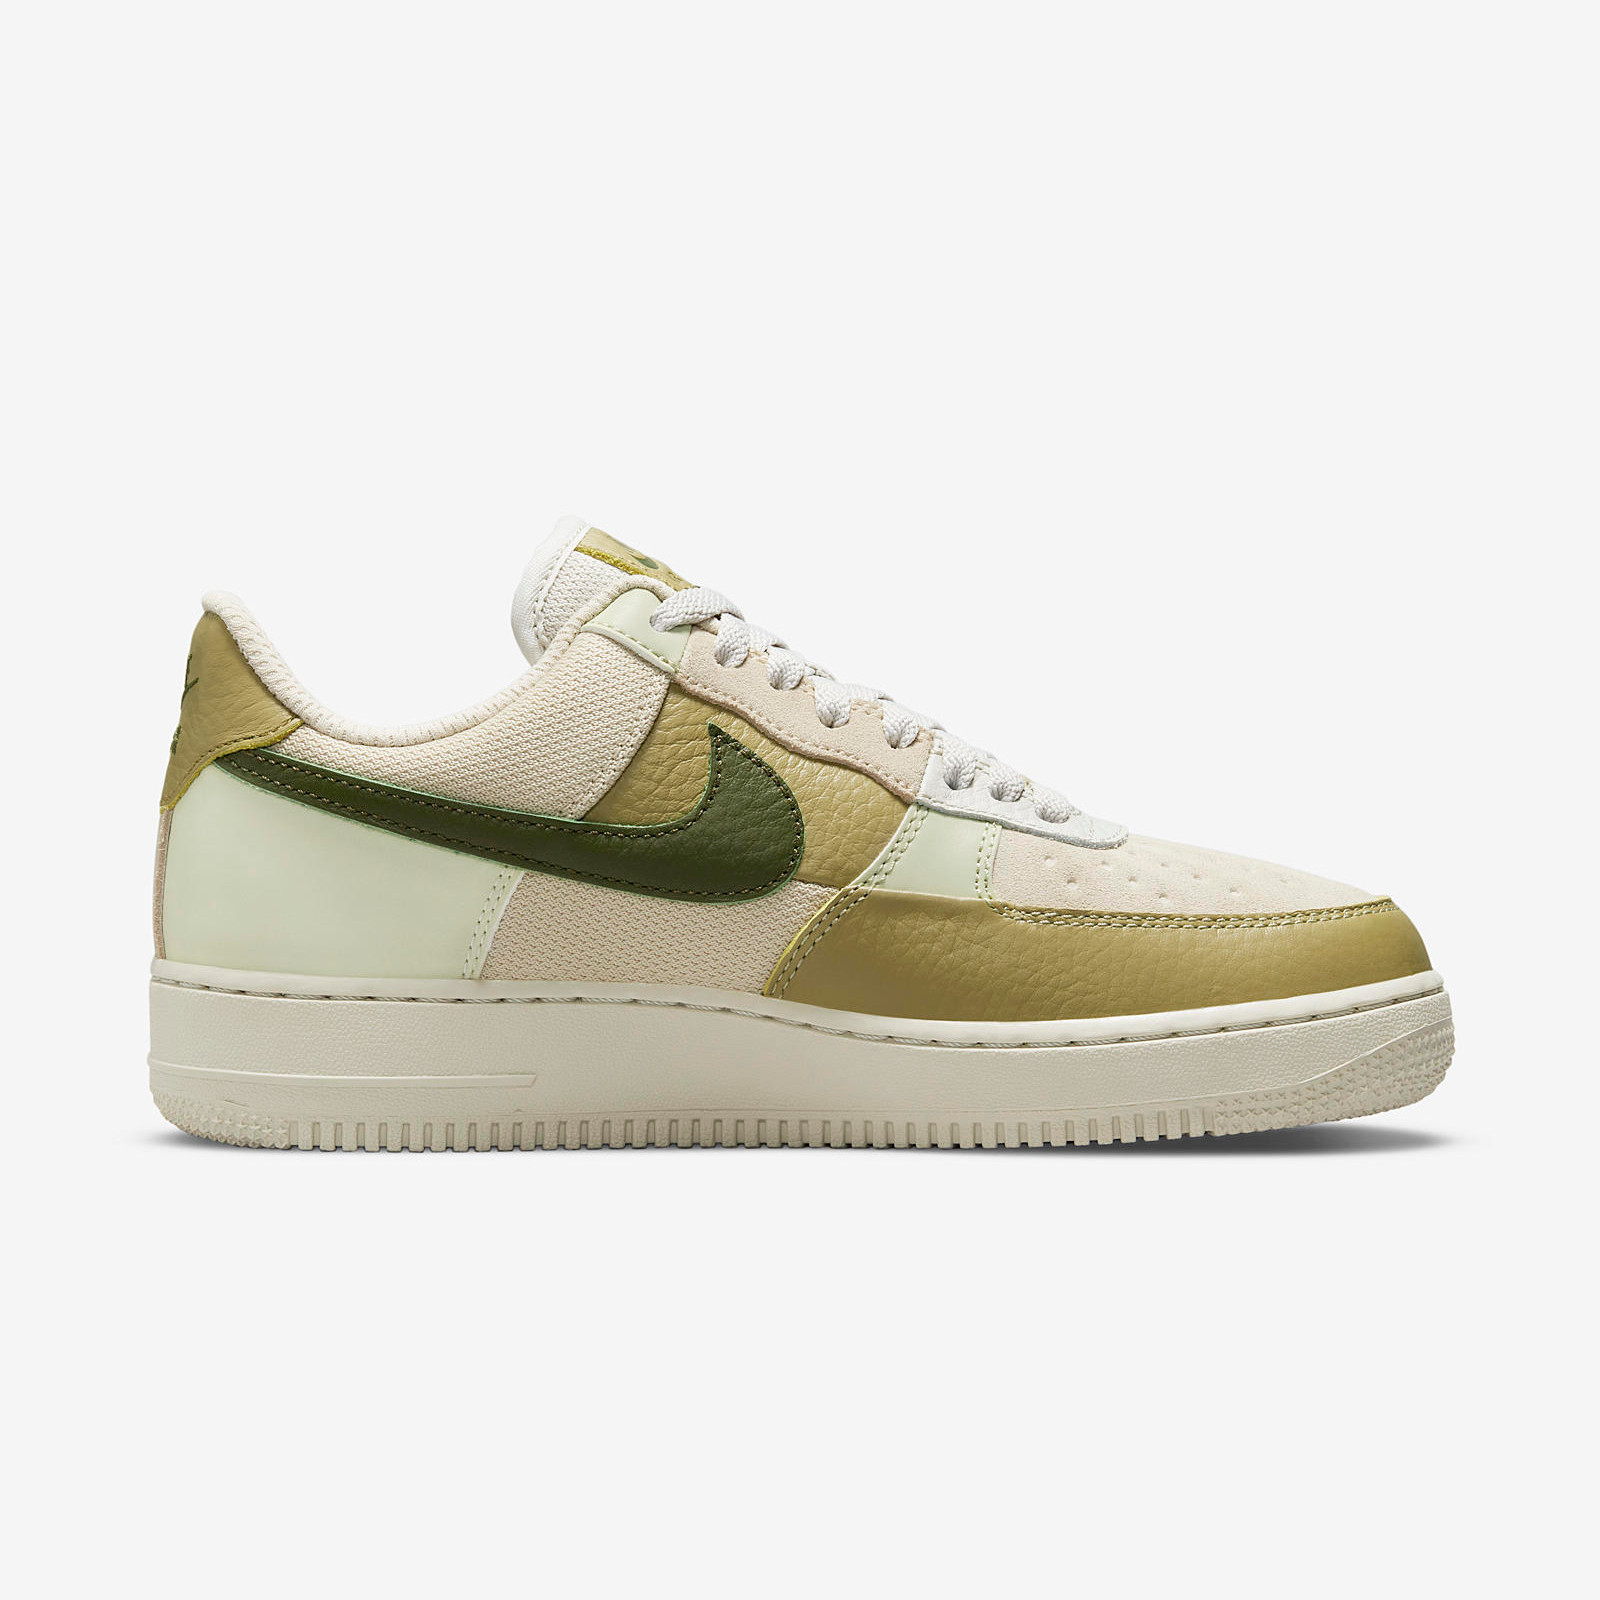 Nike Air Force 1 Low
« Rough Green »